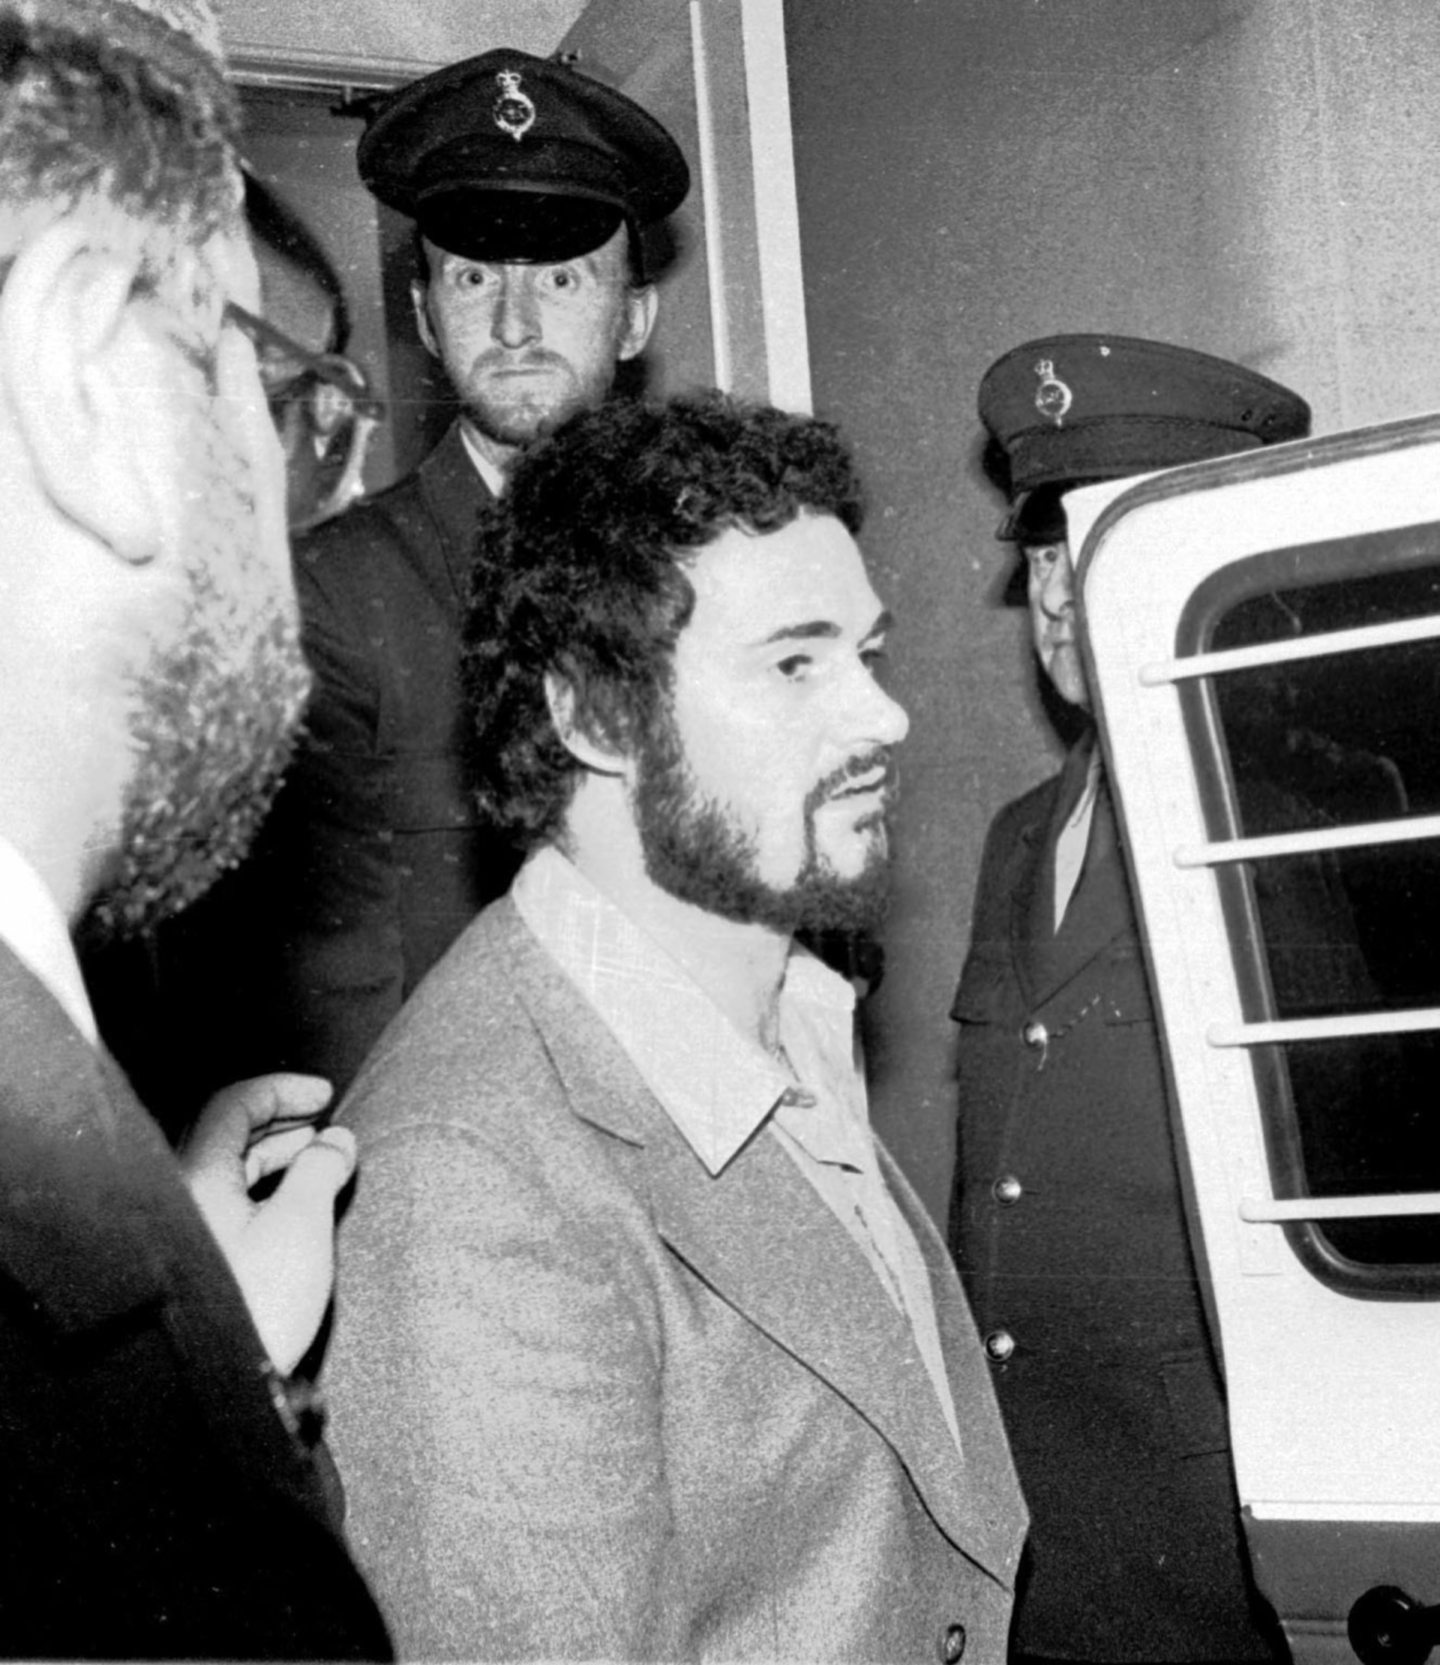 Yorkshire Ripper Peter Sutcliffe murdered 13 women between 1975 and 1980. Image: Shutterstock.